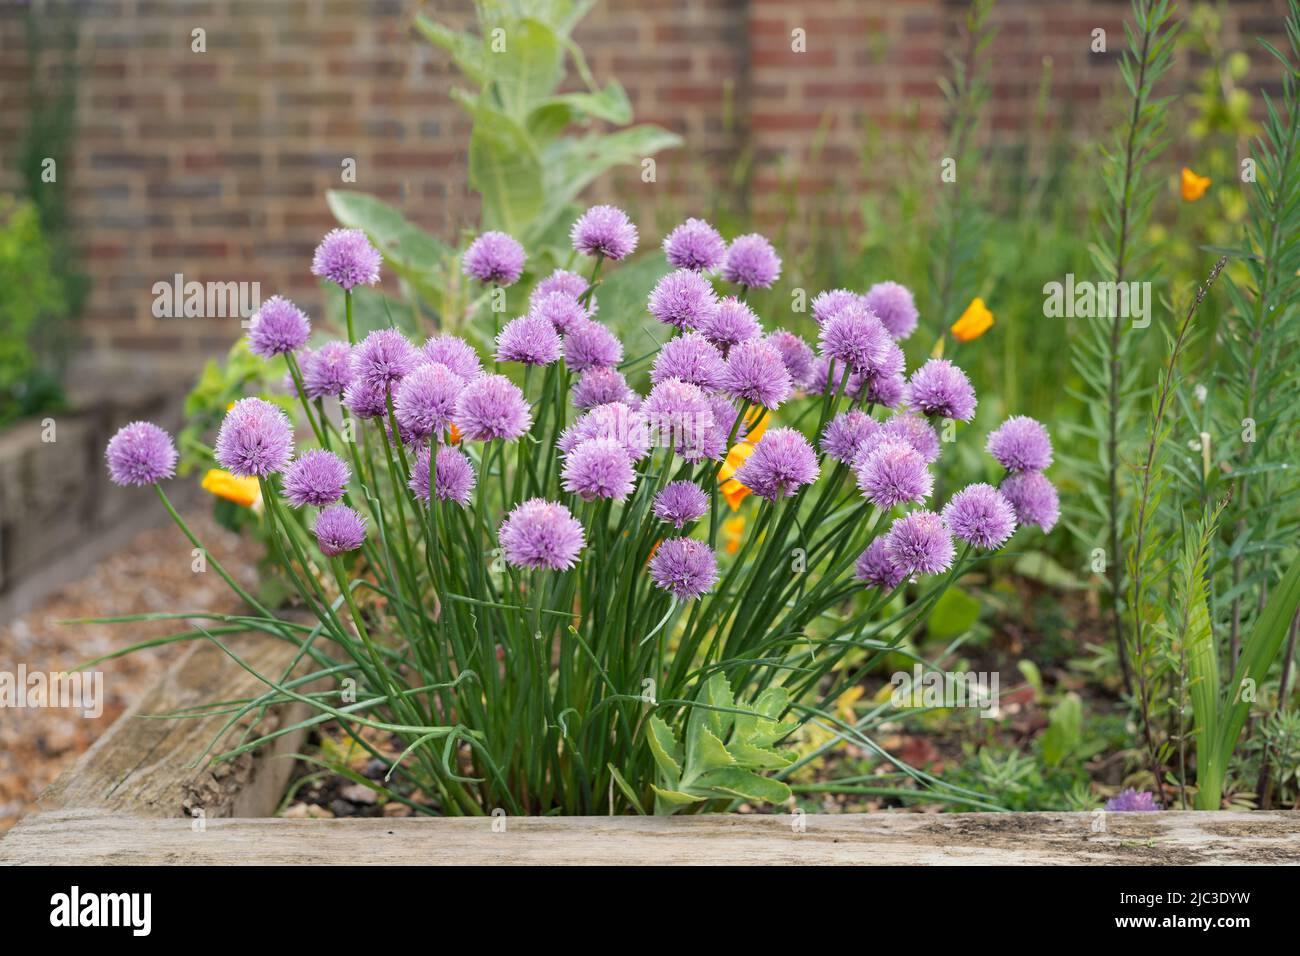 chive herbs in bloom growing in a garden. Stock Photo